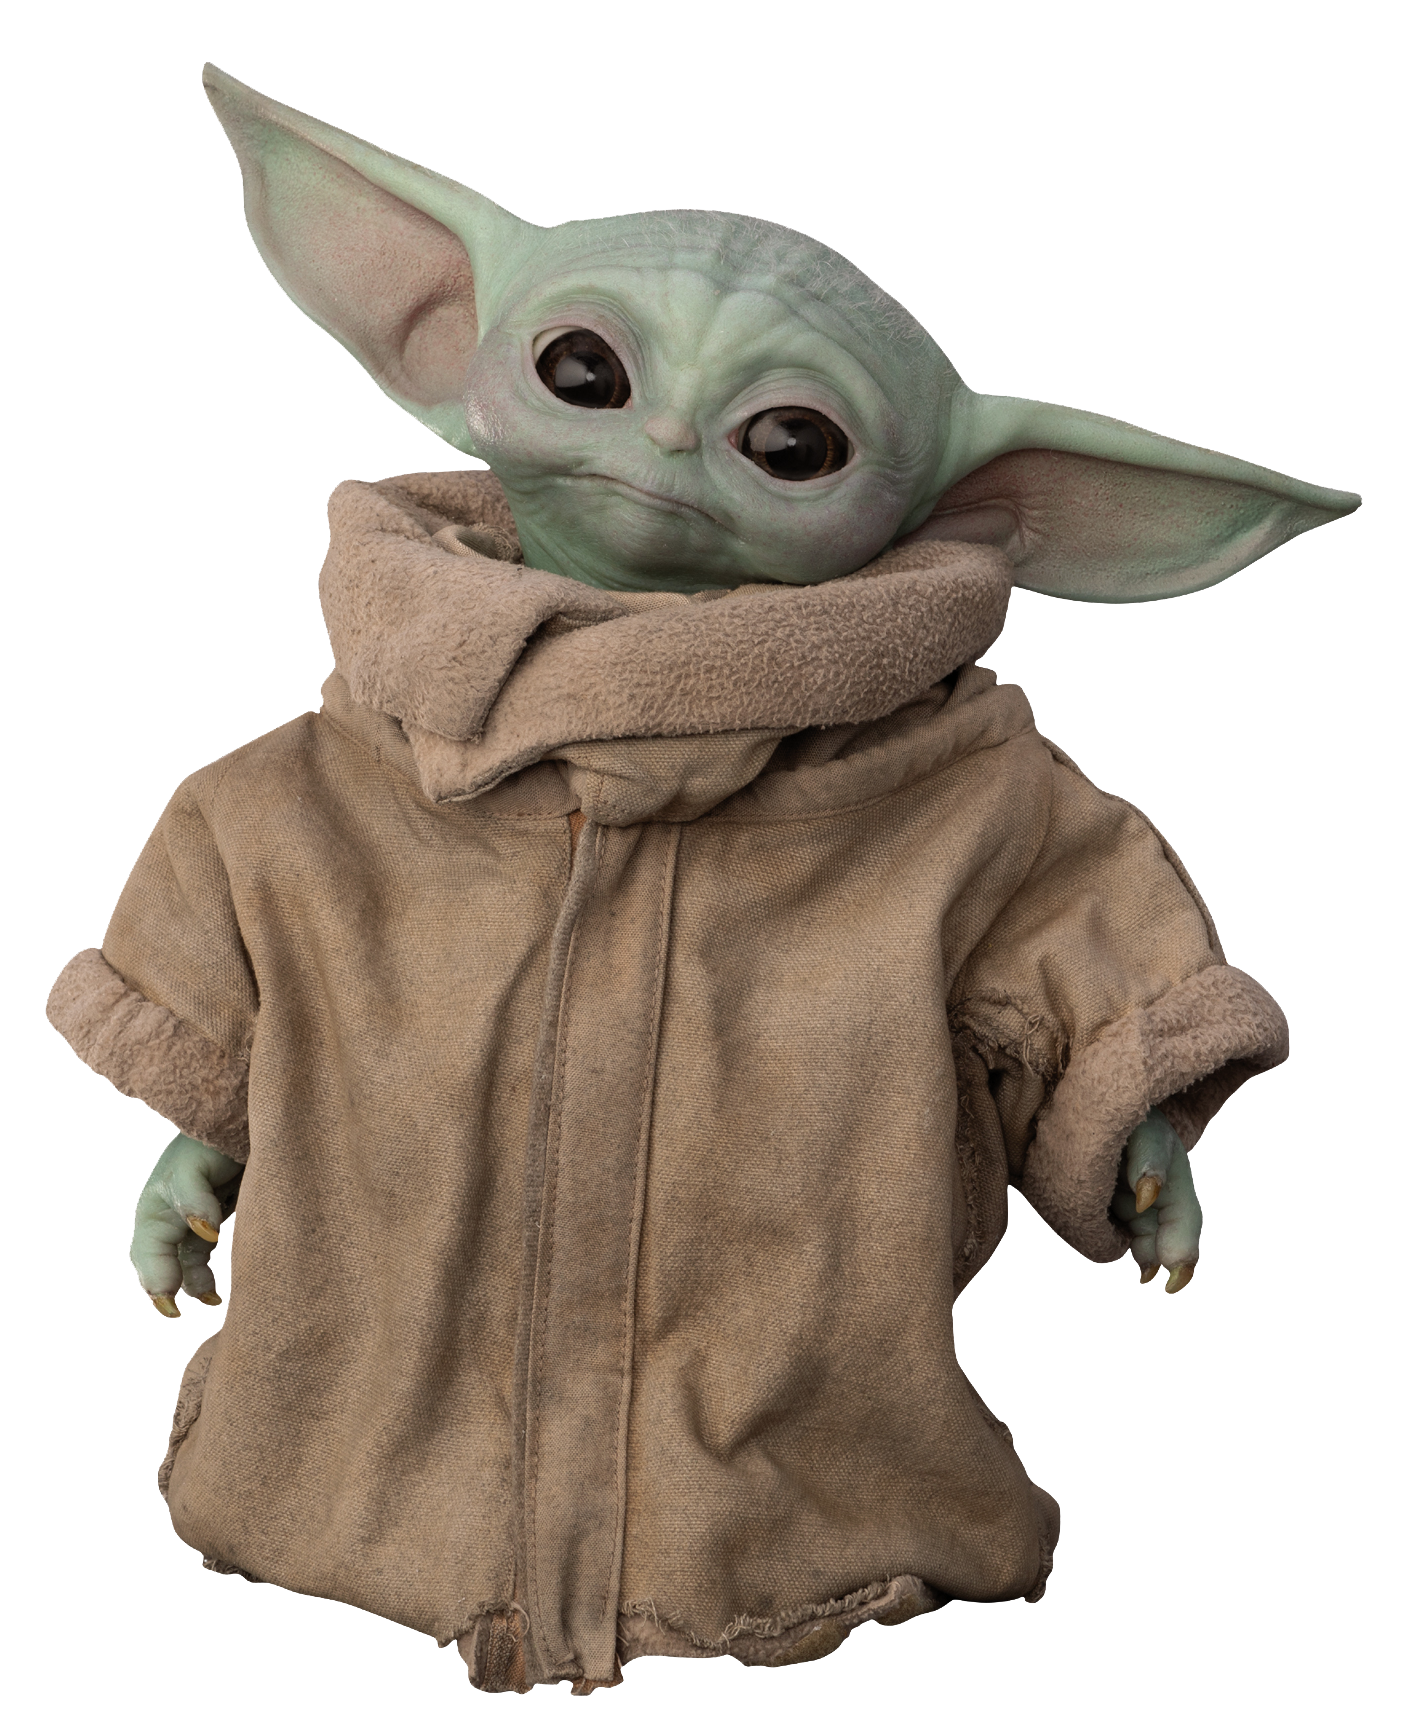 Who is Grogu? Everything you need to know about Baby Yoda